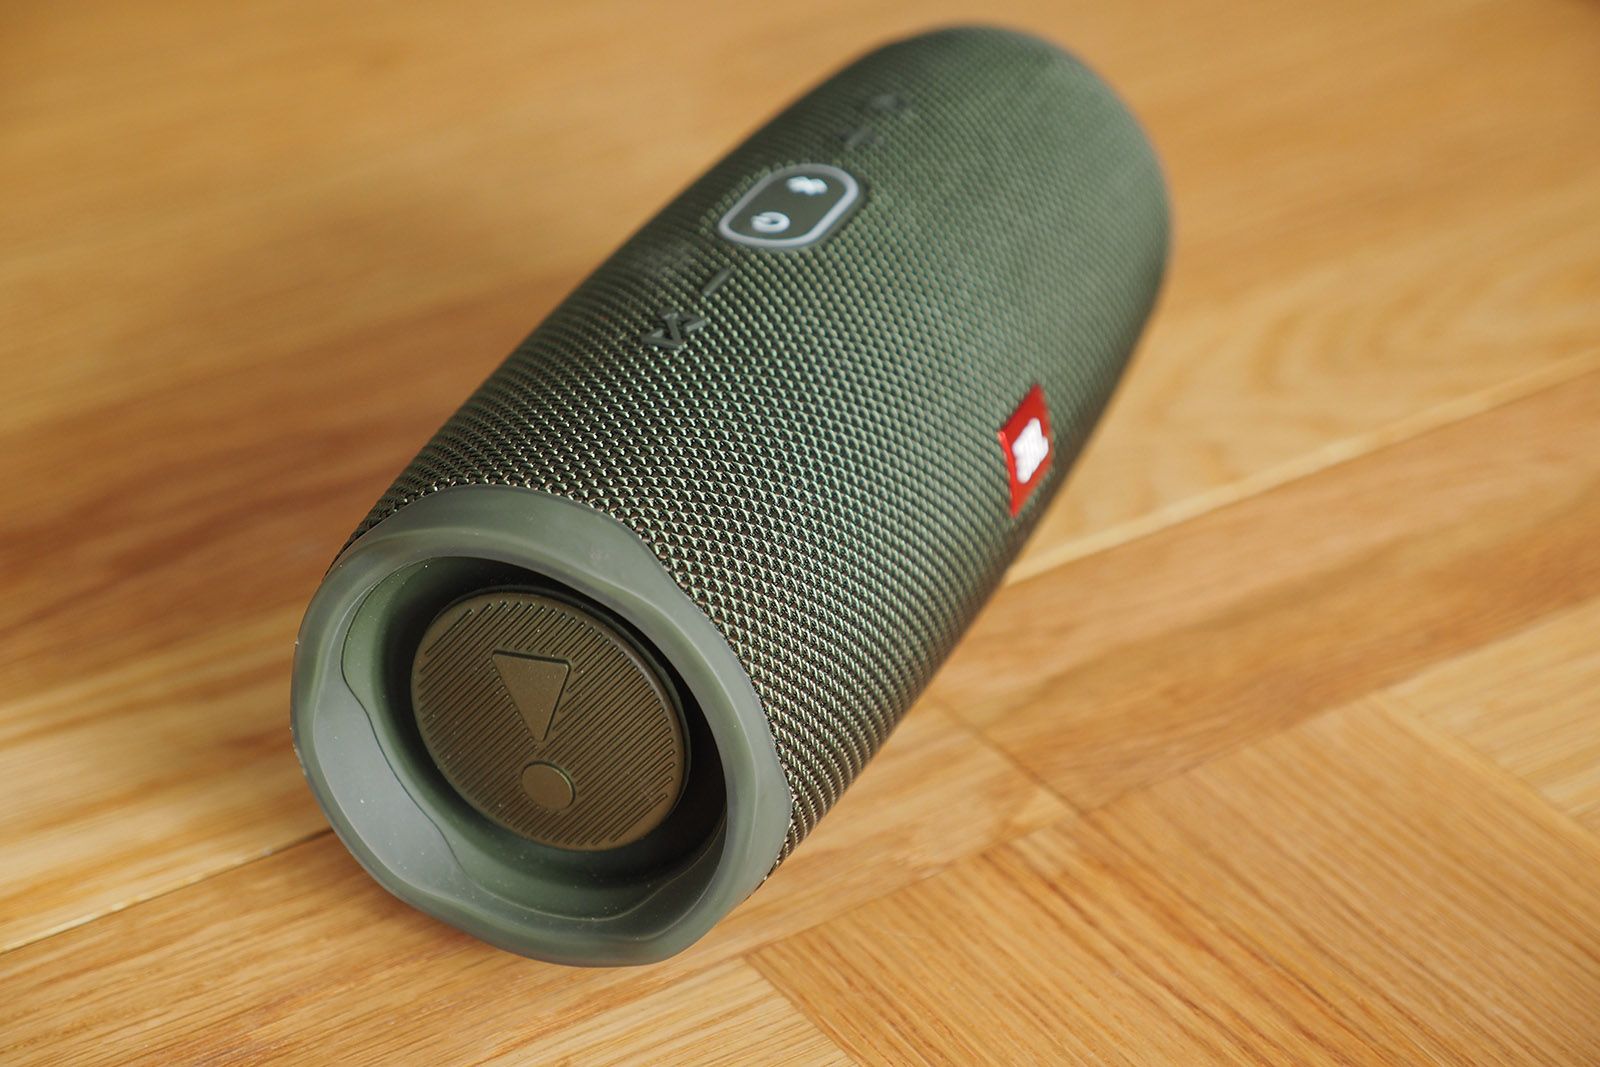 jbl charge 4) the speaker doesn't make any sound not even the